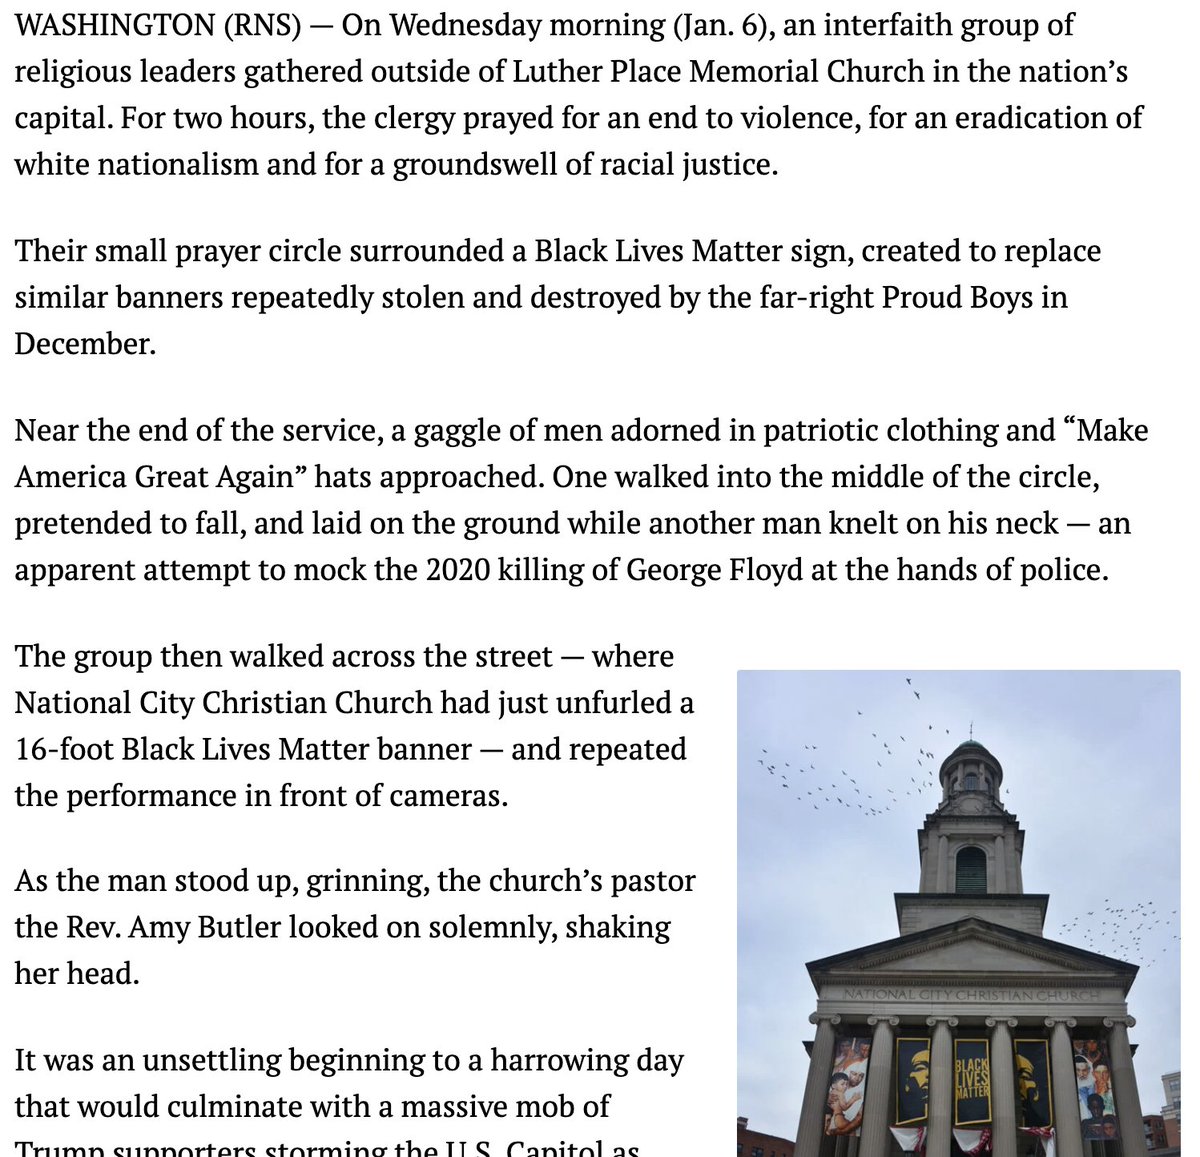 1. There's lots of focus on insurrectionist faith during the Capitol attack, and rightfully so.But worth noting OTHER faith expressions that day—like liberal clergy who led a protest vigil next to a BLM sign in DC.People in Trump gear harassed them. https://religionnews.com/2021/01/06/as-chaos-hits-capitol-two-forms-of-faith-on-display/